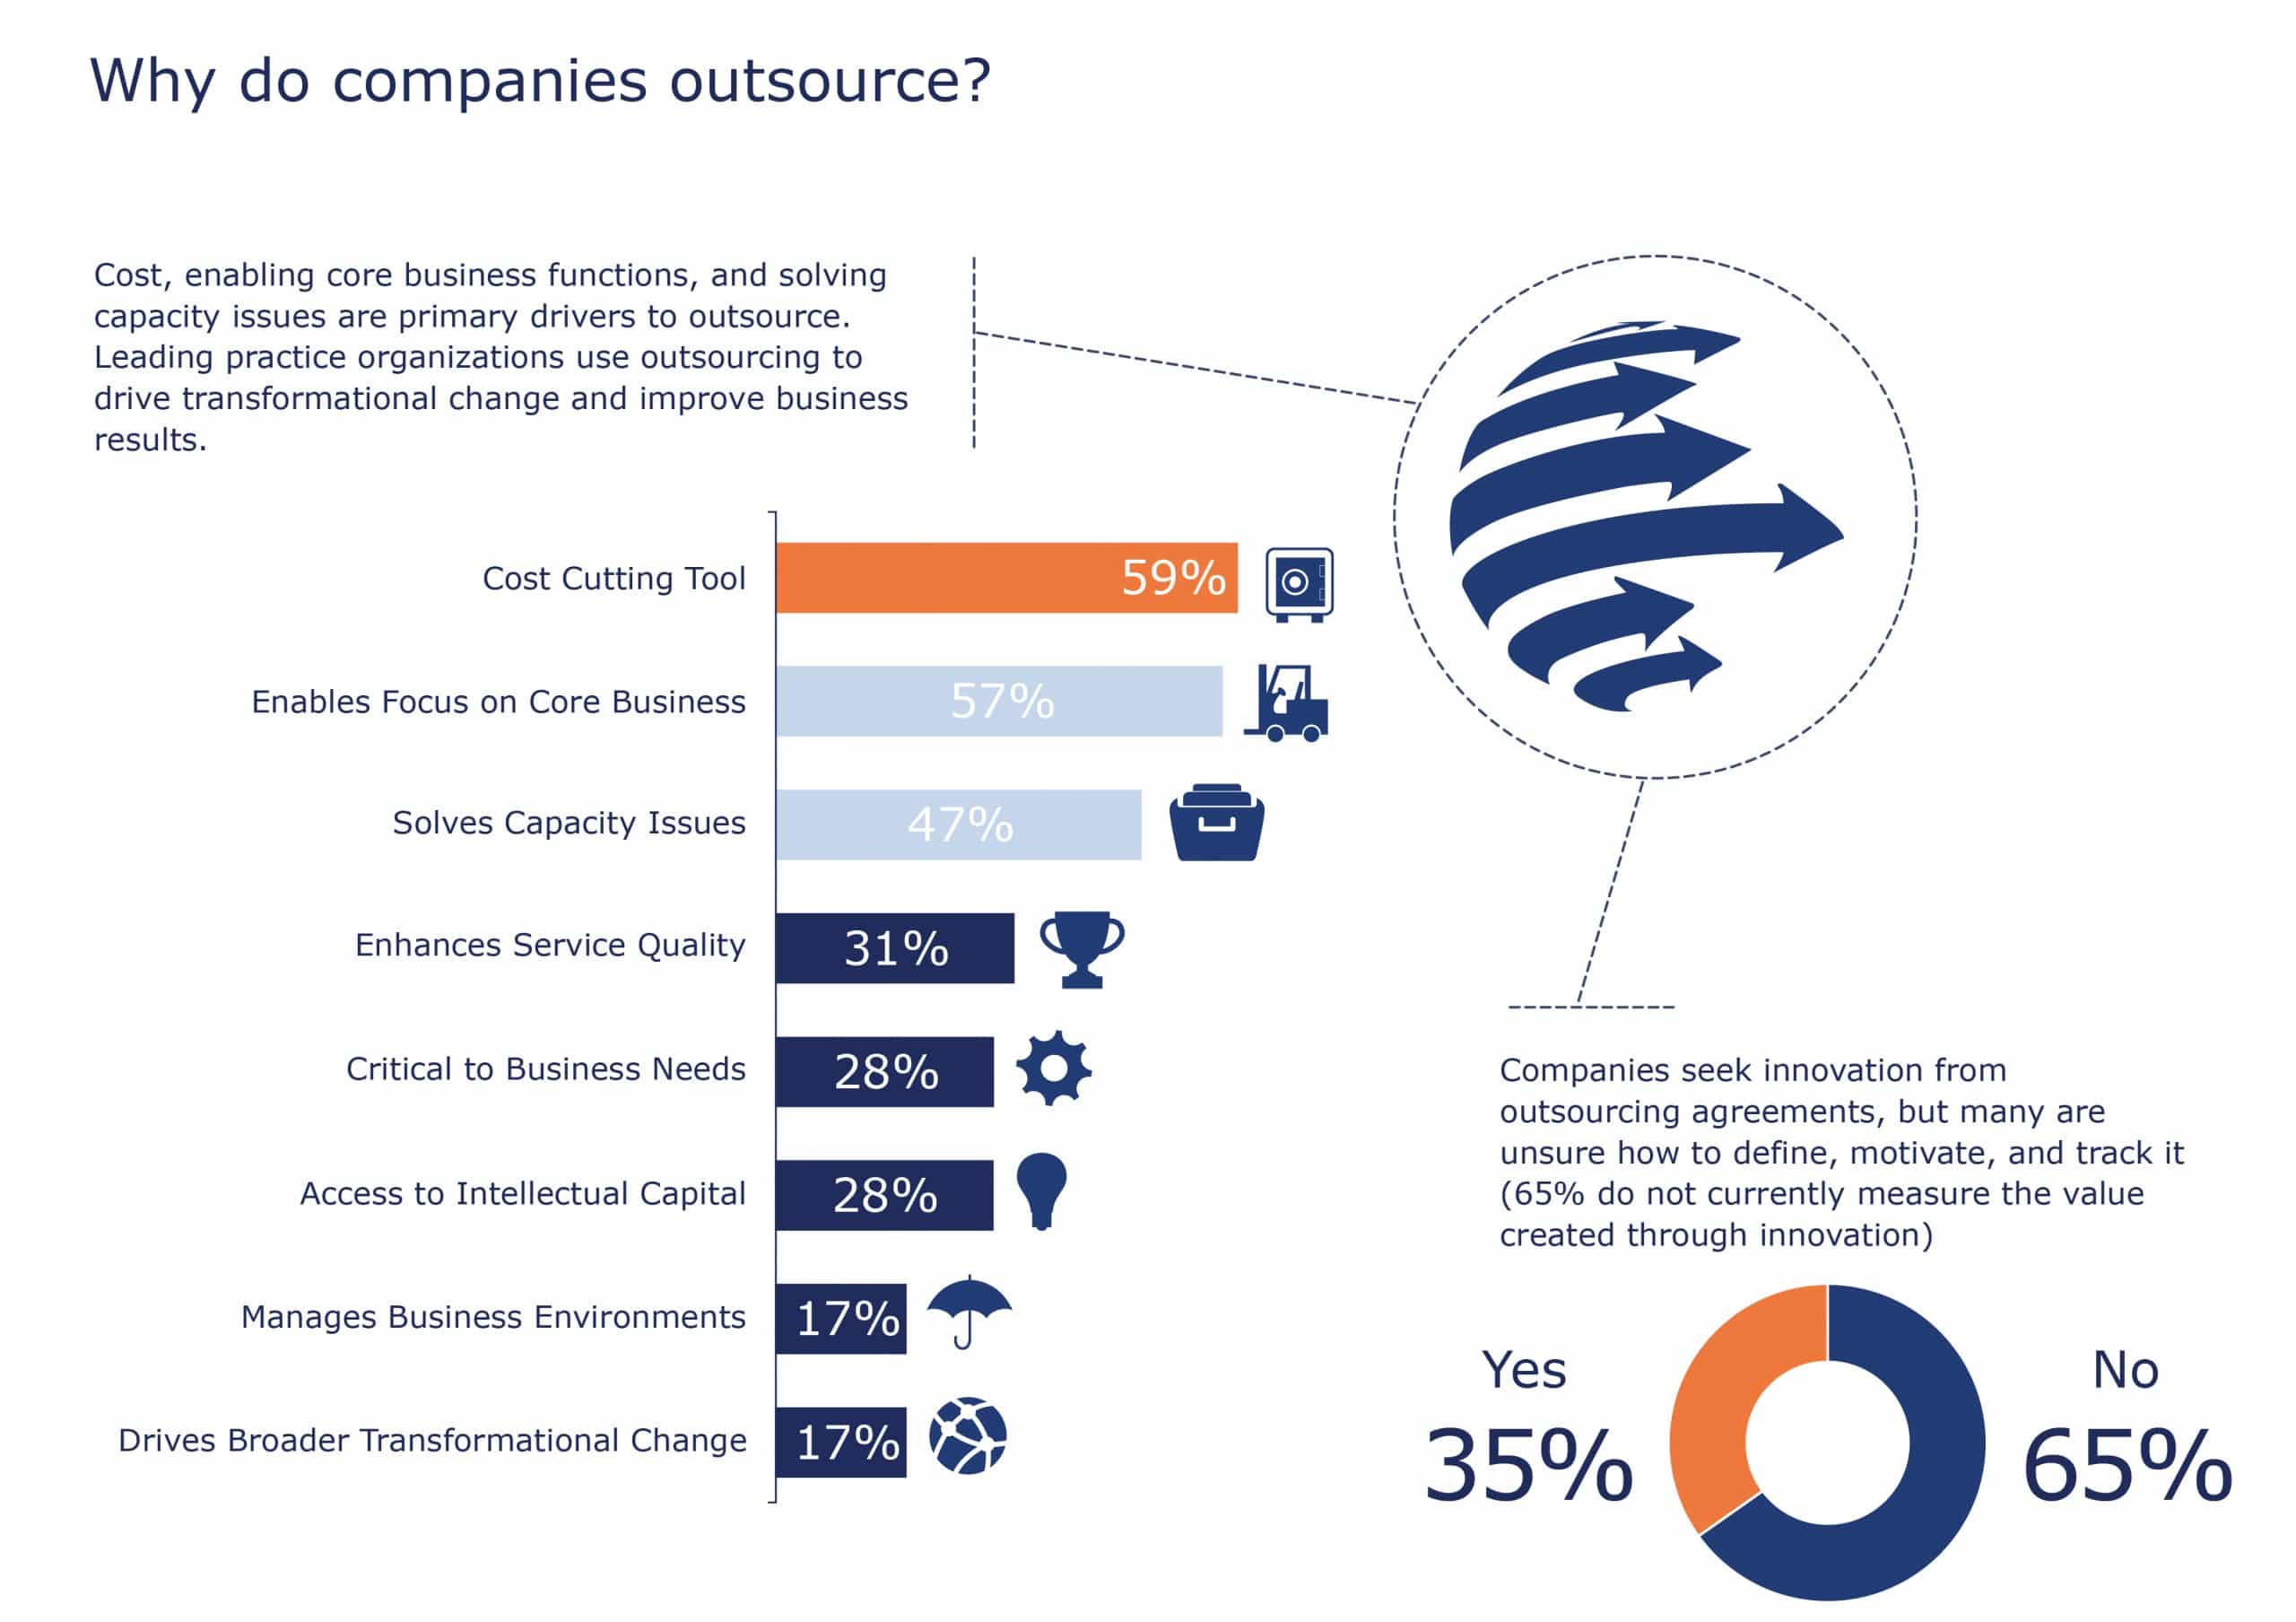 Why do companies outsource?